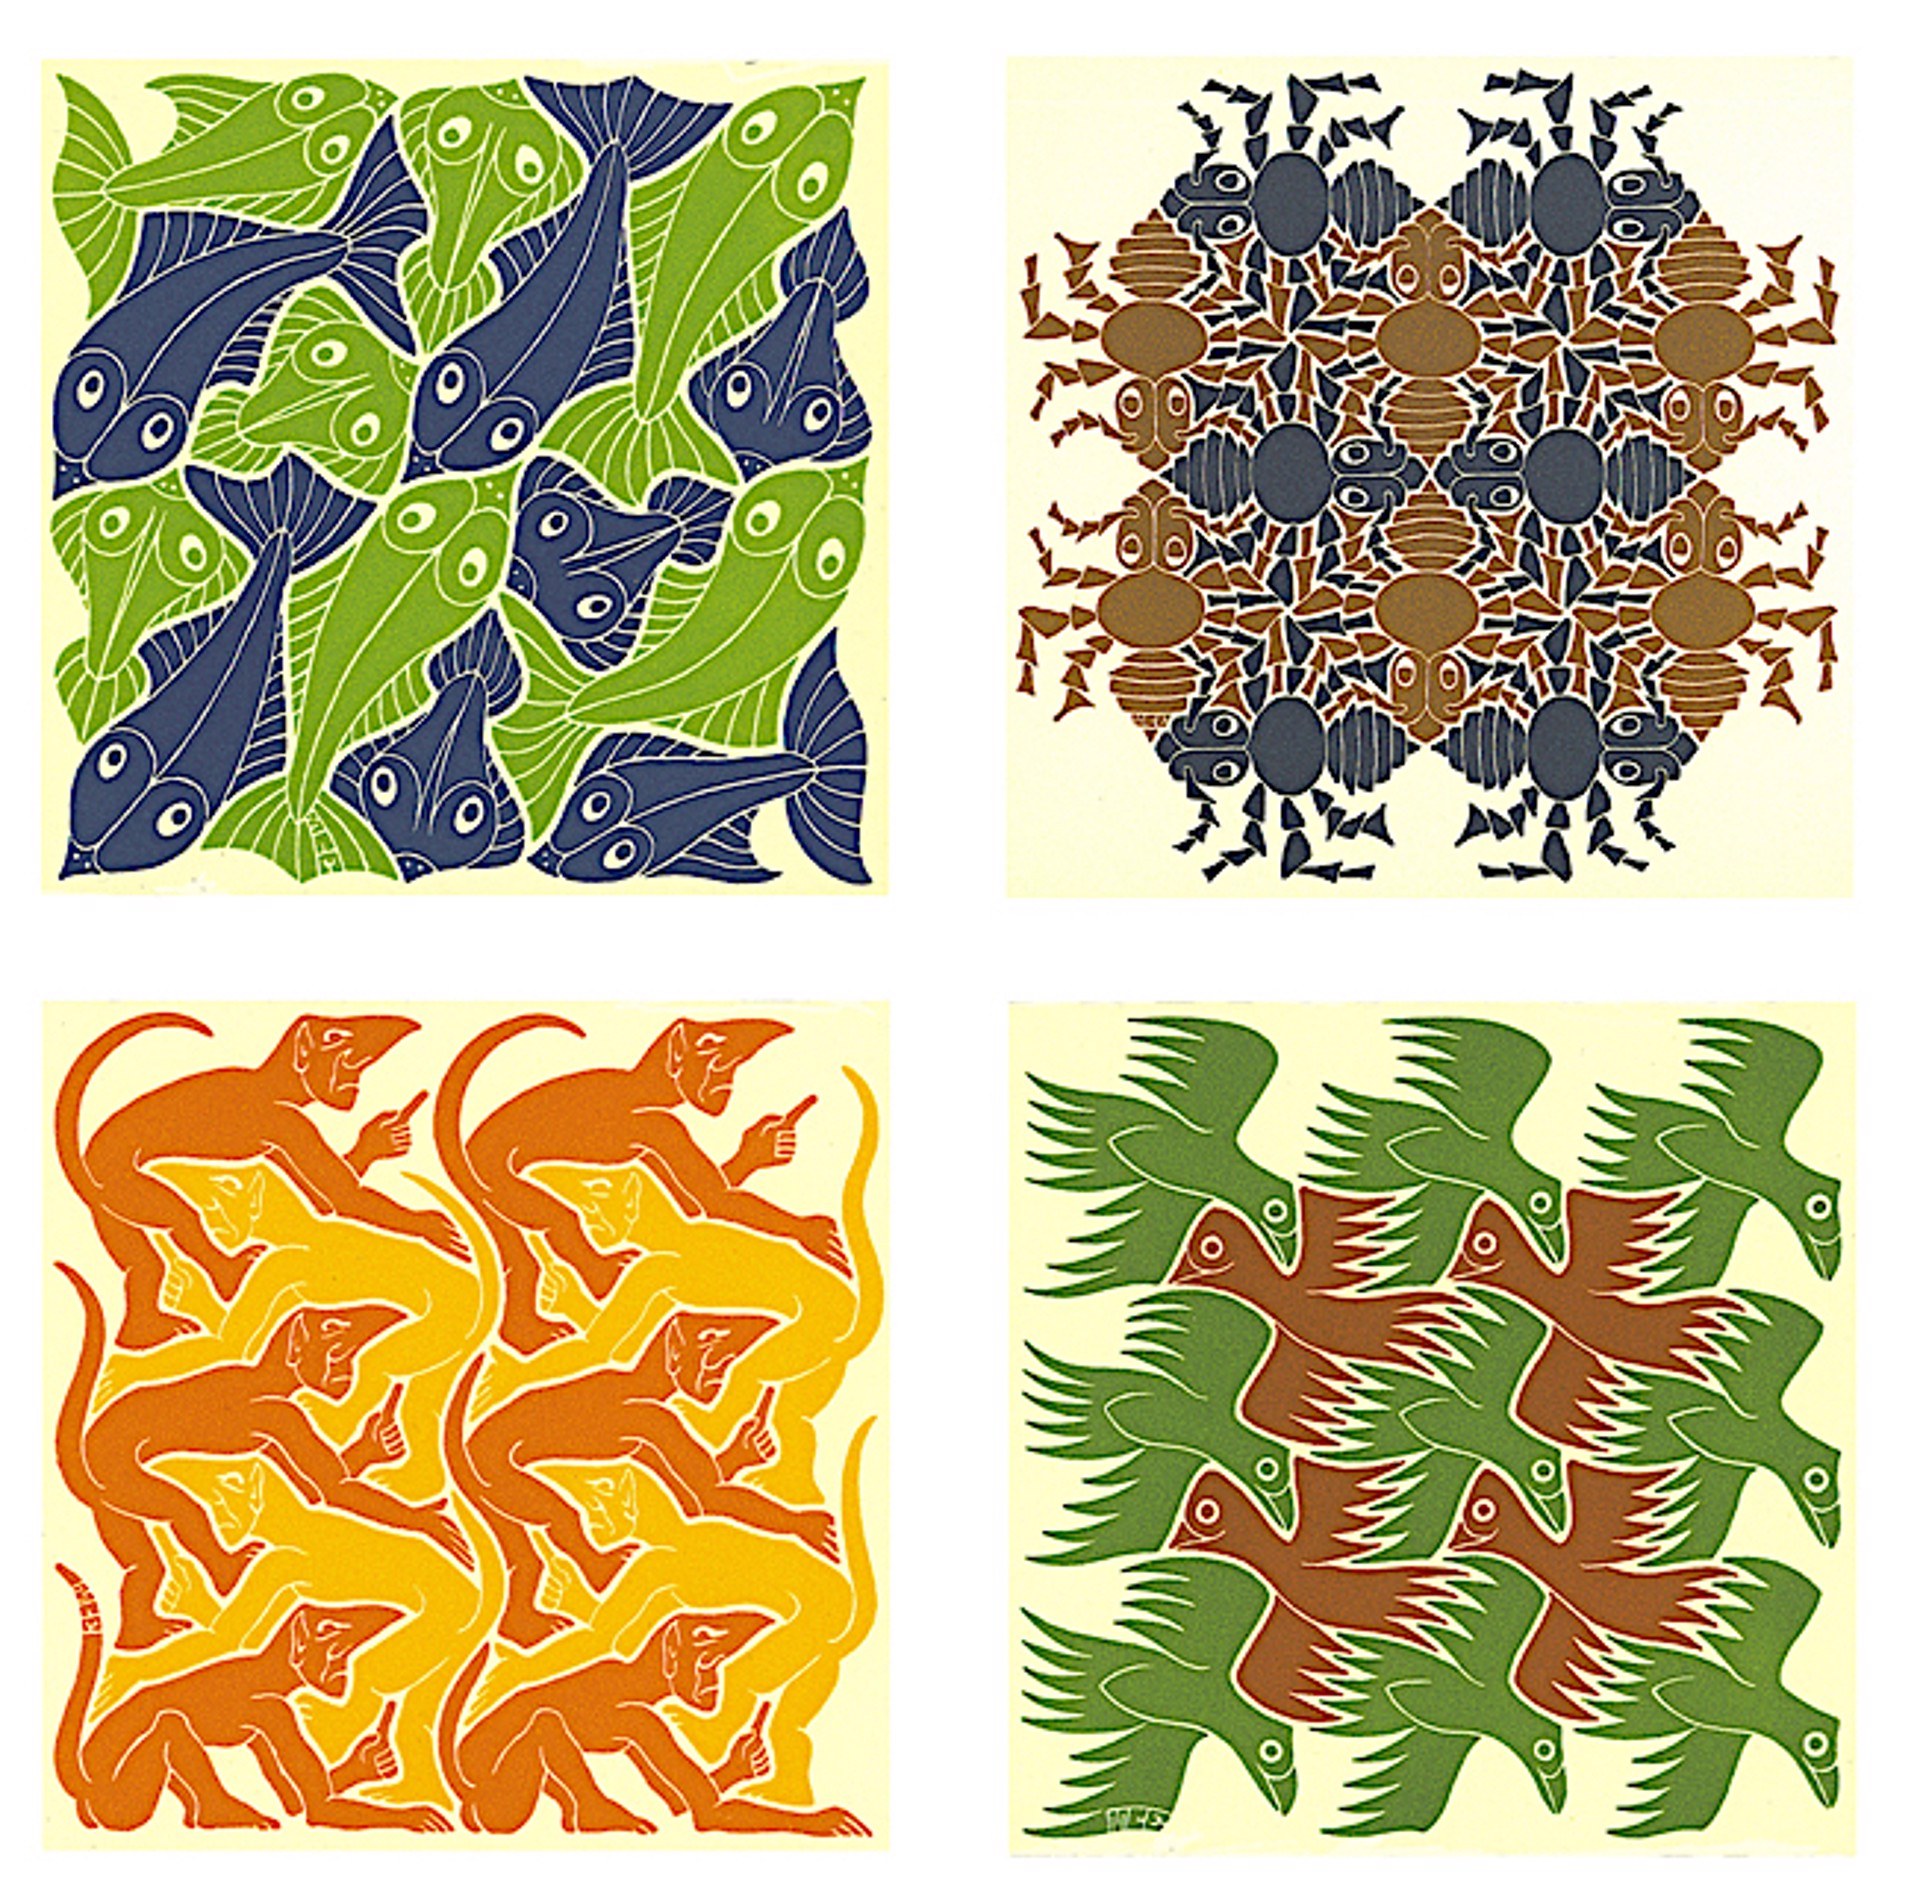 Strens Suite of Four Elements (Earth, Water, Fire, Sky) by M.C. Escher